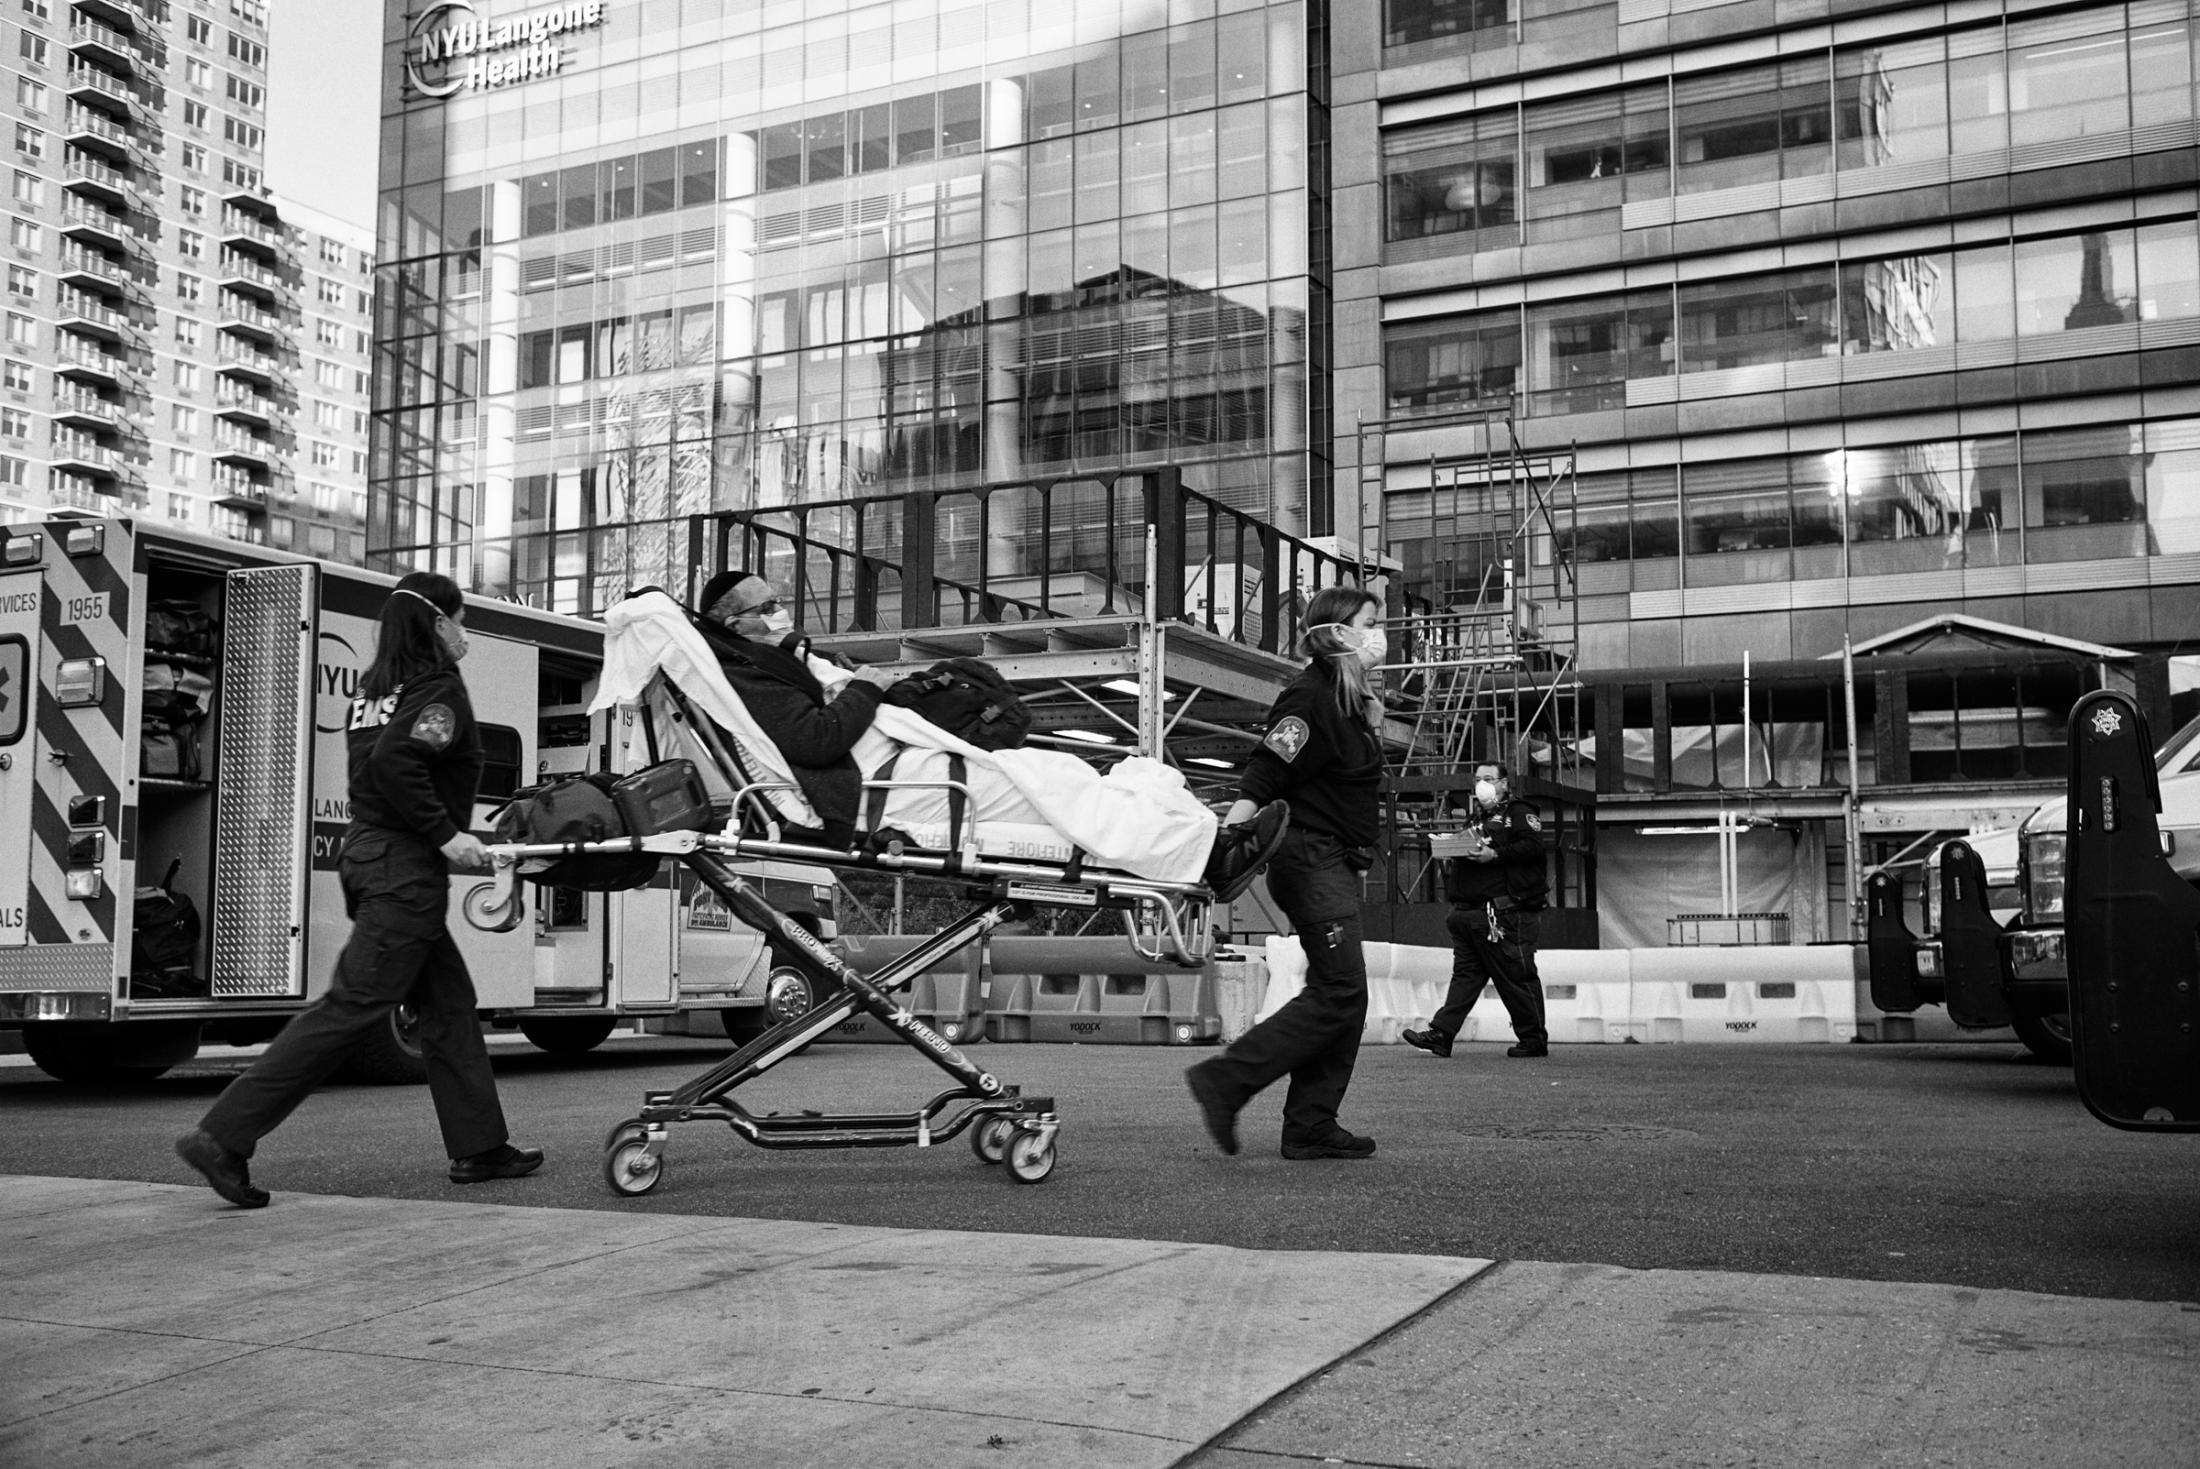 Dire Silence: NYC in Pandemic -  NYU Langone Tisch Hospital, New York. Apr. 22, 2020. 